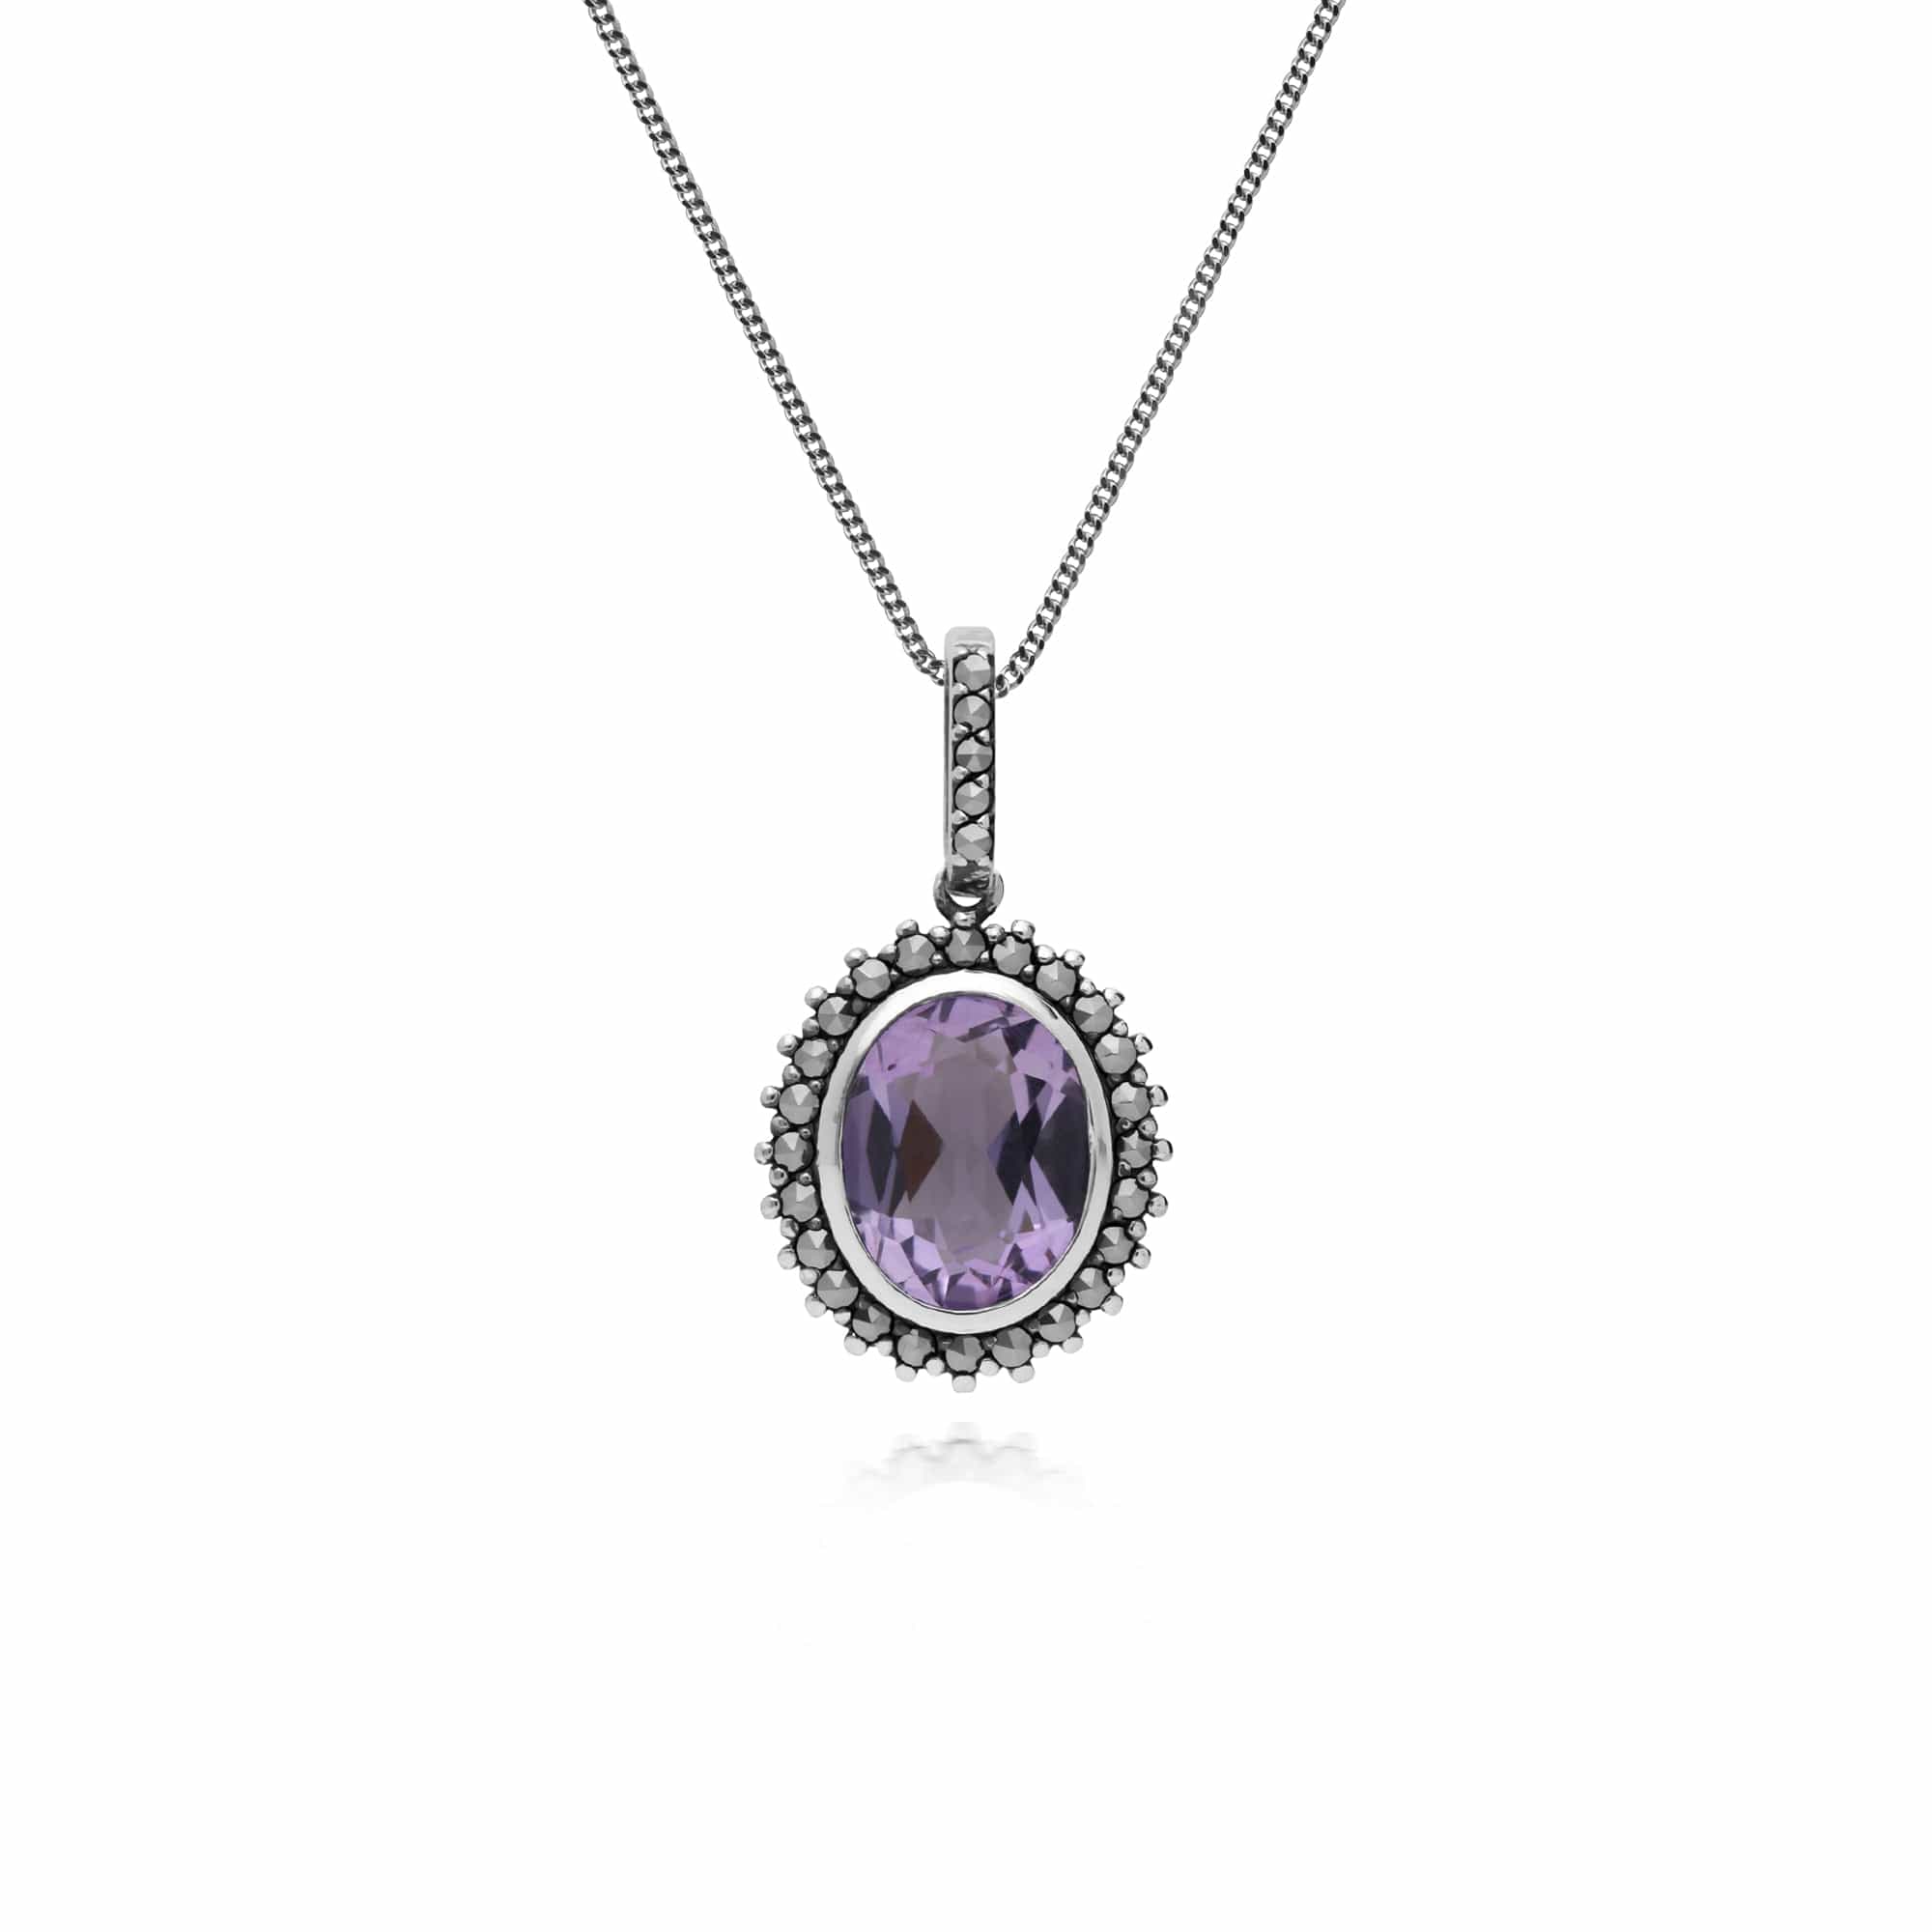 214P301402925 Gemondo Sterling Silver Amethyst & Marcasite Oval Pendant with 45cm Chain 1